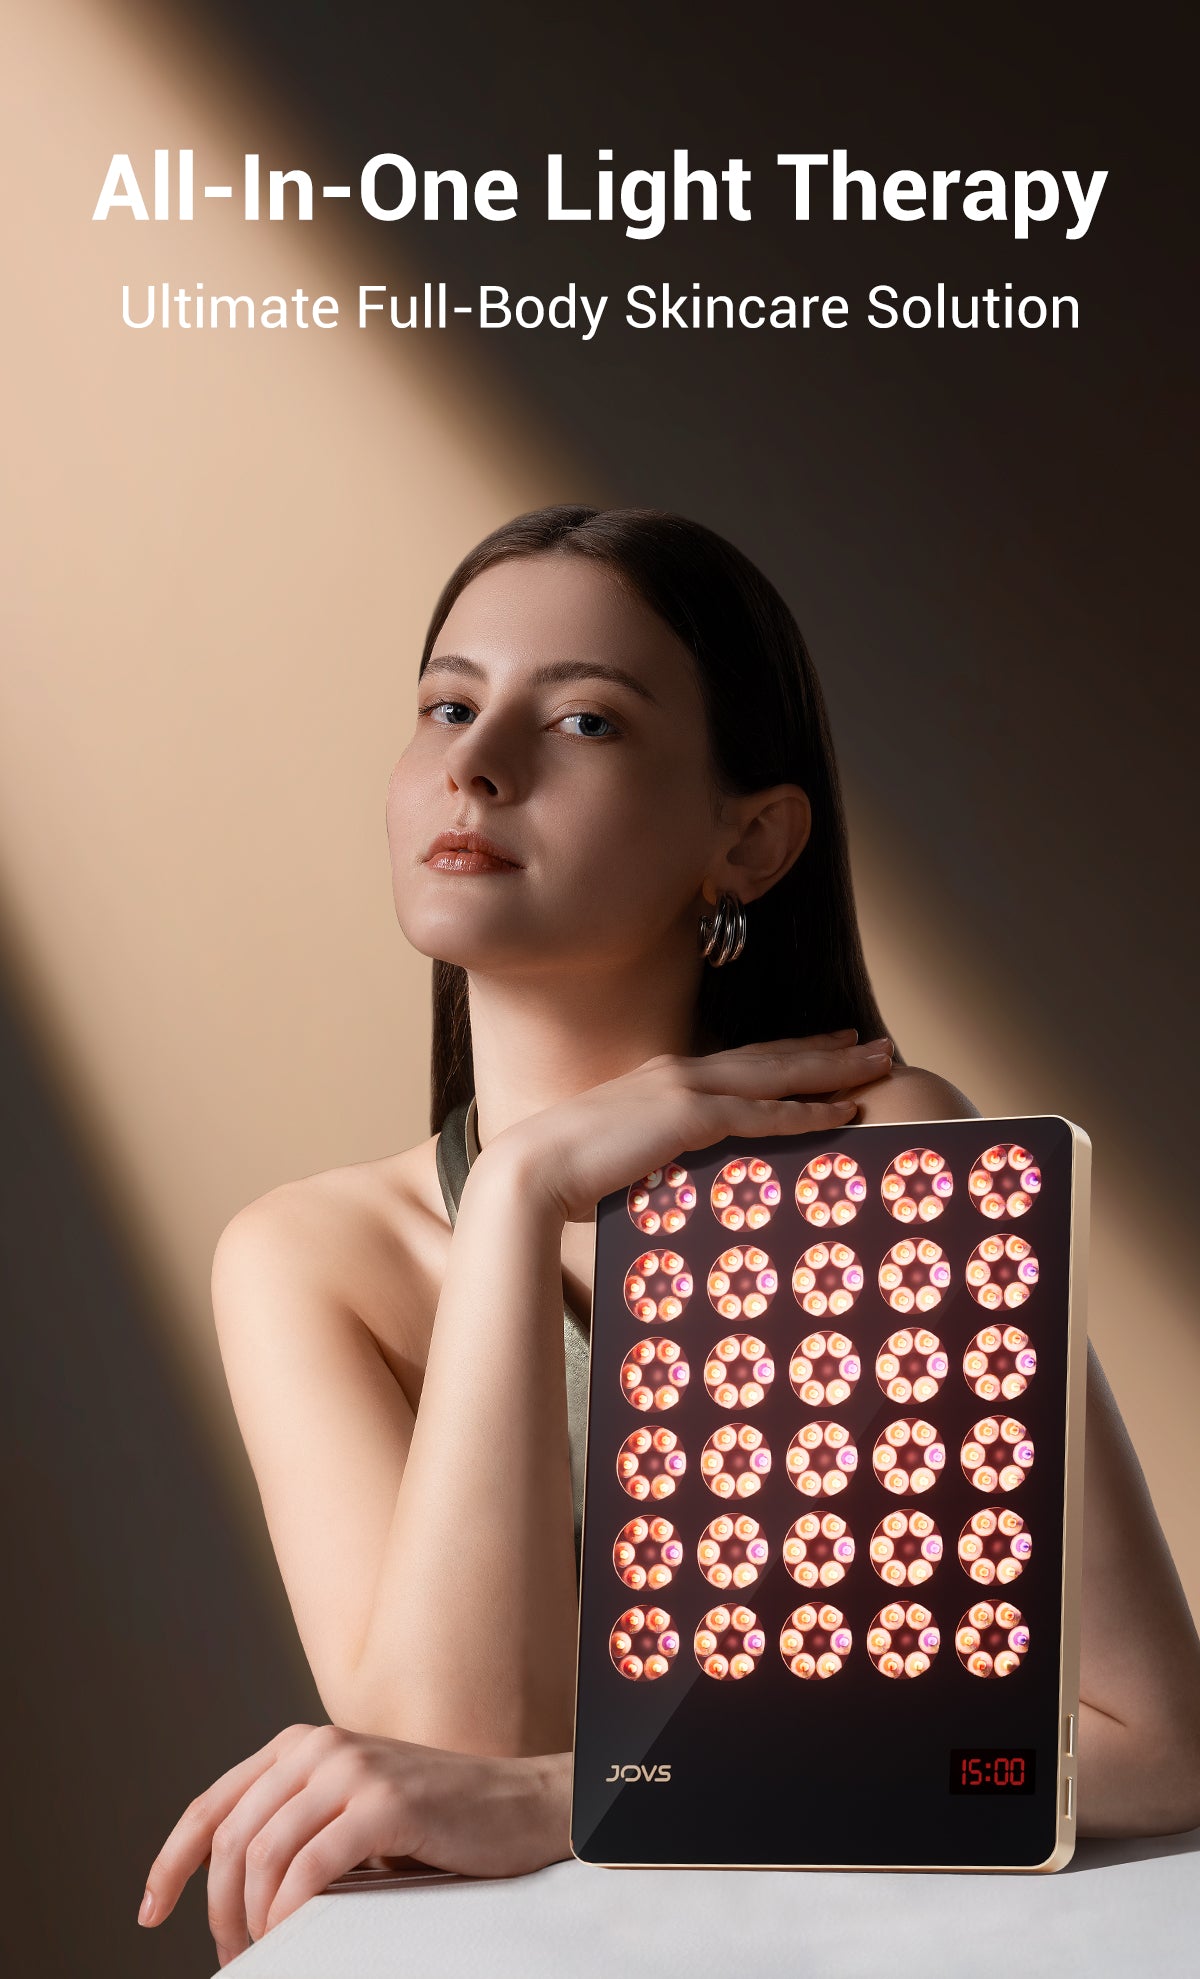 Woman with All-In-One JOVS Light Therapy Device for Comprehensive Skincare.